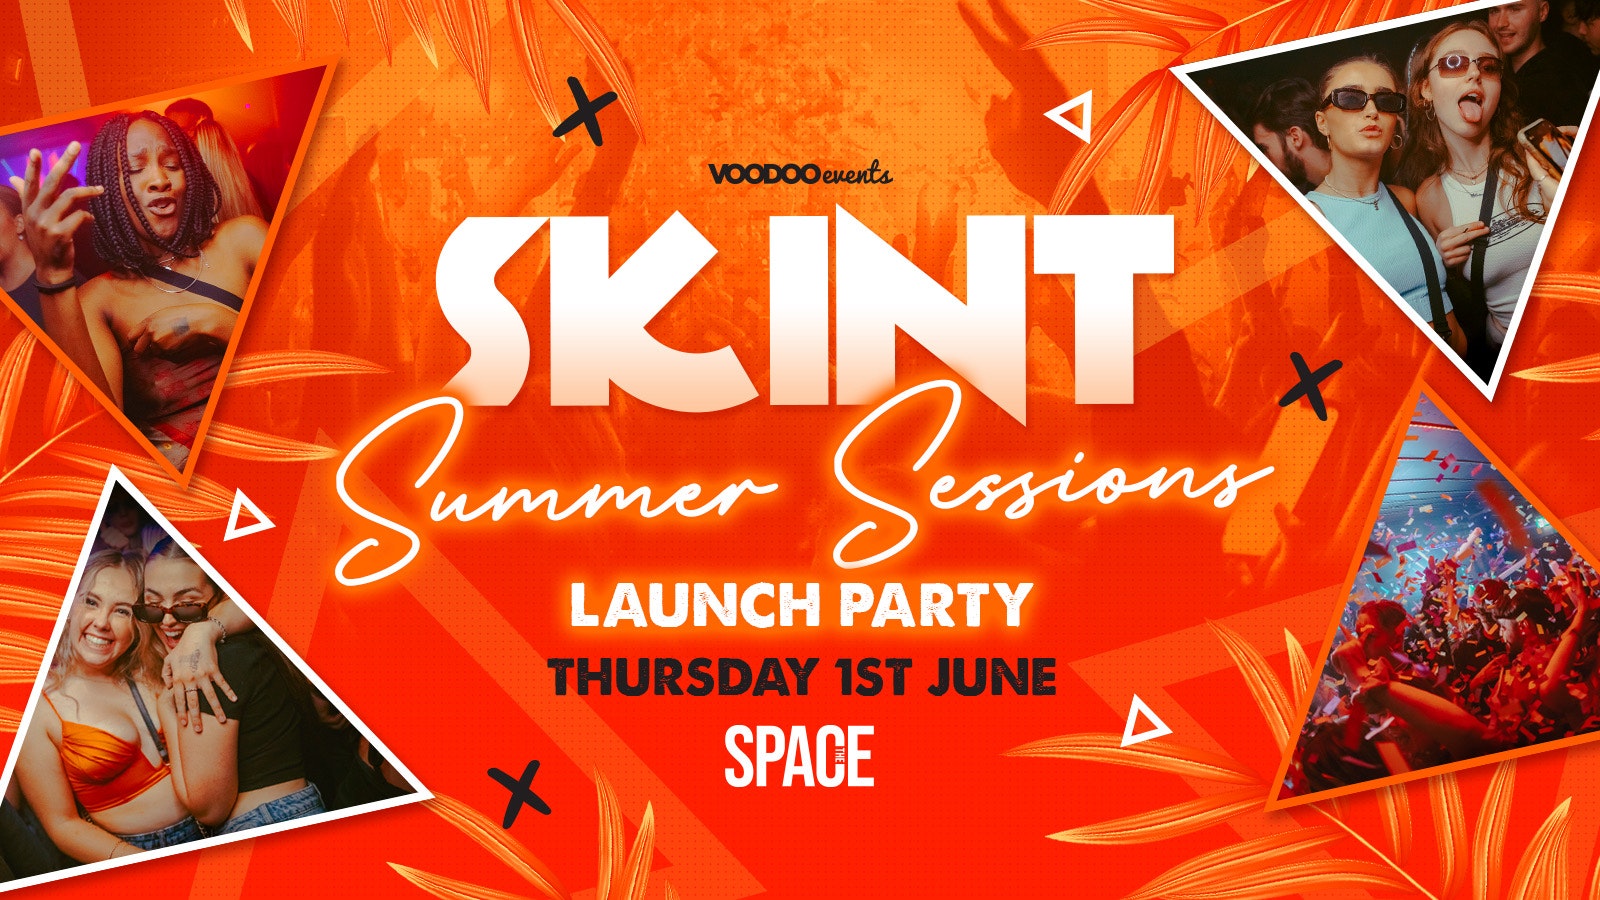 Skint Thursdays at Space Summer Sessions – 15th June